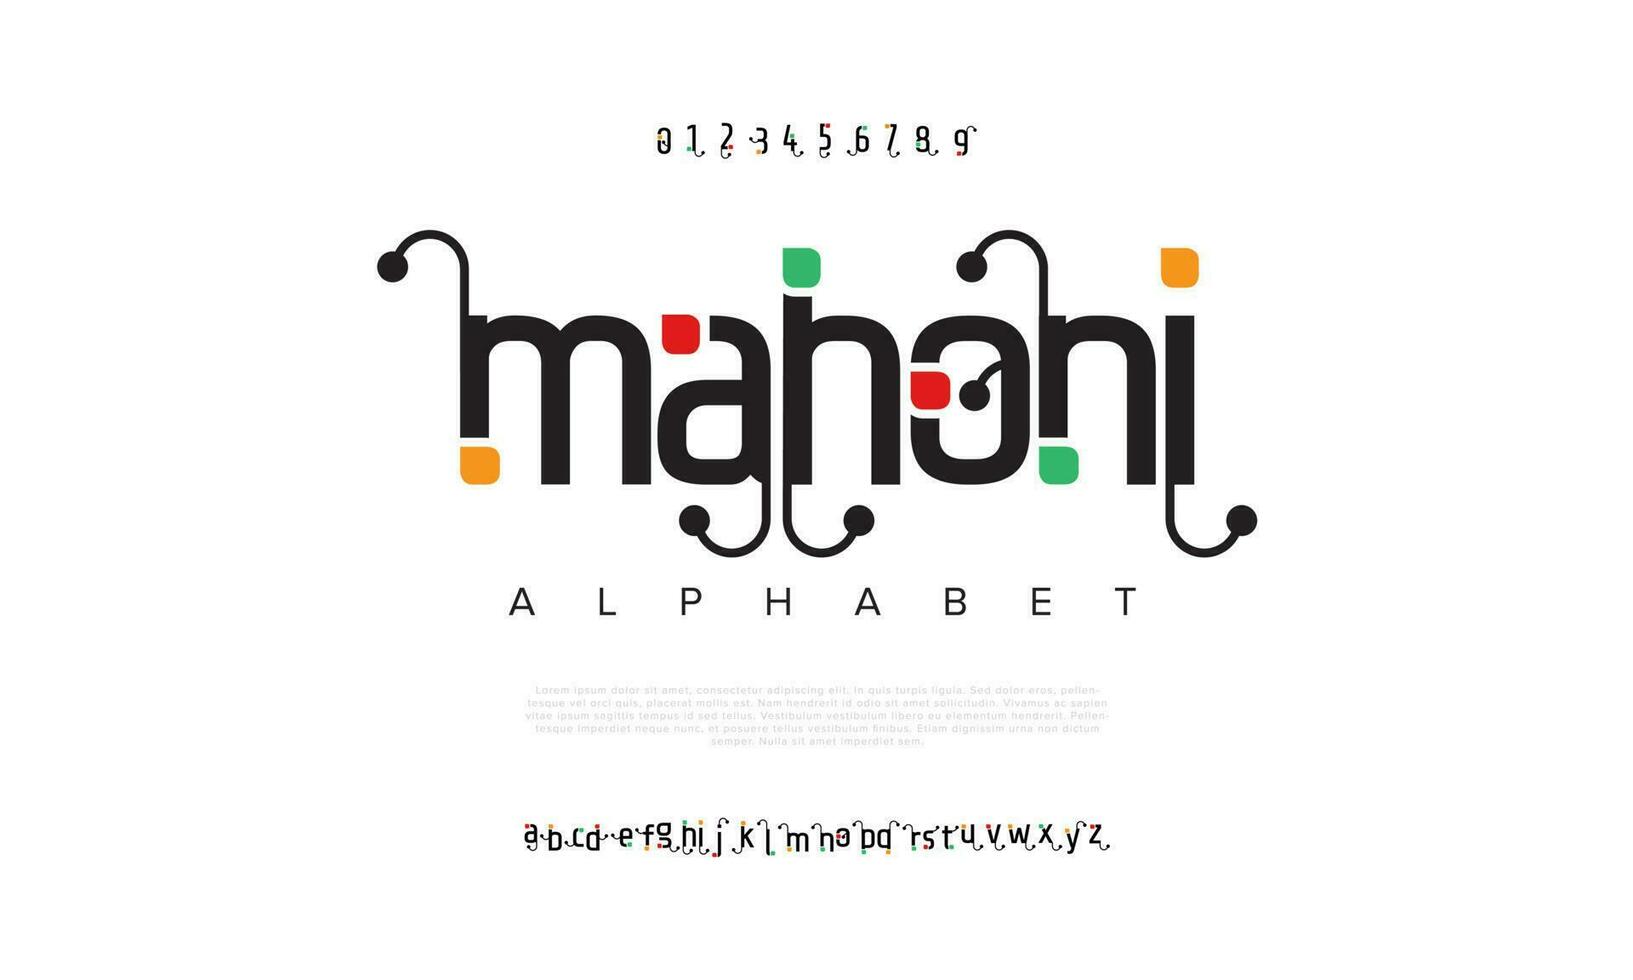 Mahoni abstract digital technology logo font alphabet. Minimal modern urban fonts for logo, brand etc. Typography typeface uppercase lowercase and number. vector illustration